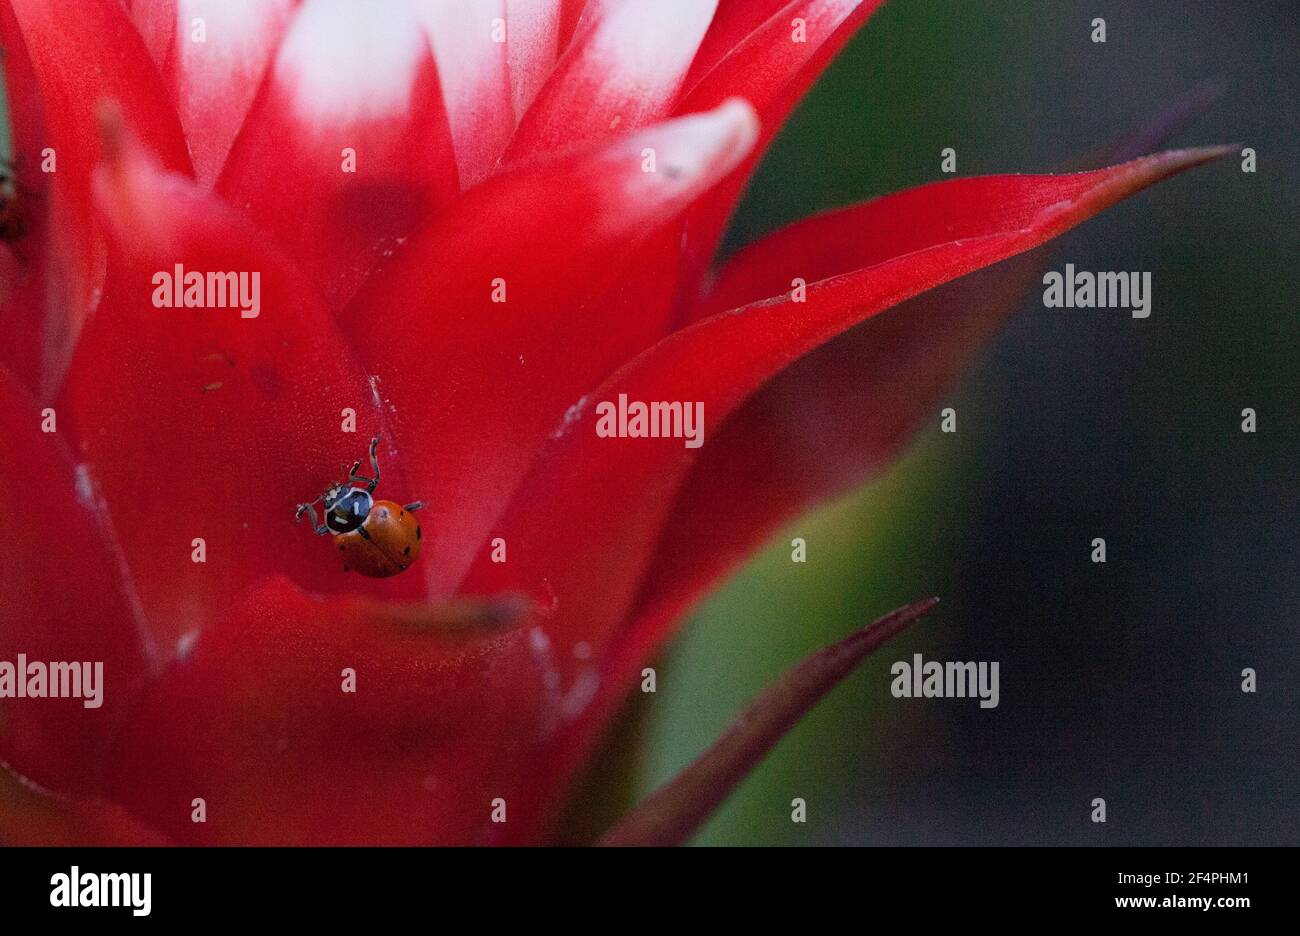 Red and white bromeliad flower with a Convergent lady beetle also called the ladybug Hippodamia convergens Stock Photo